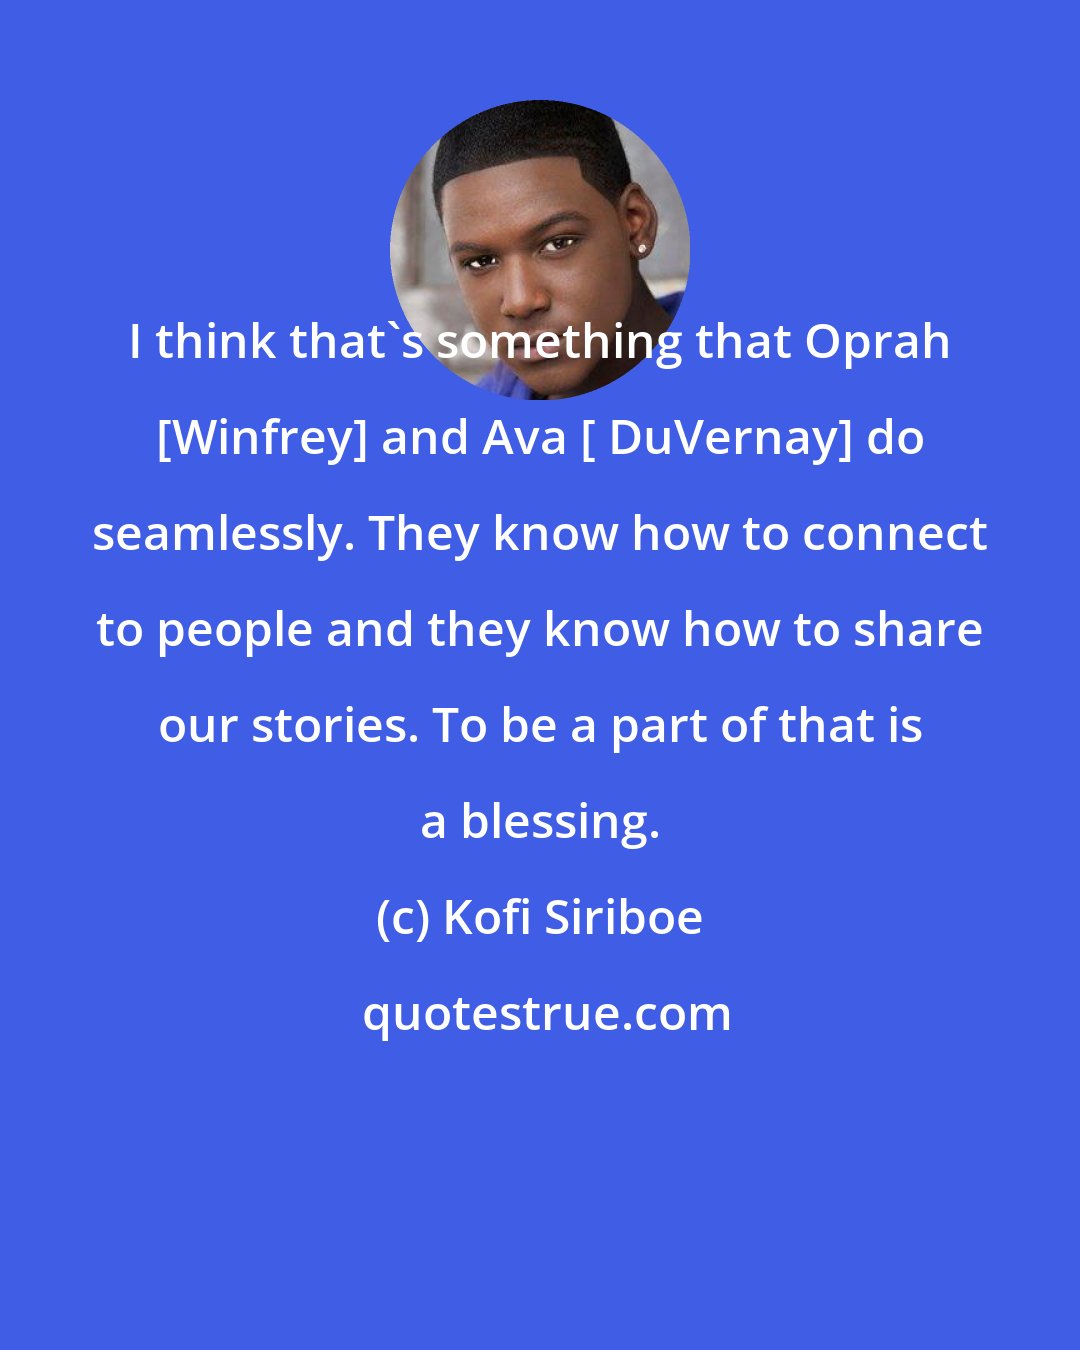 Kofi Siriboe: I think that's something that Oprah [Winfrey] and Ava [ DuVernay] do seamlessly. They know how to connect to people and they know how to share our stories. To be a part of that is a blessing.